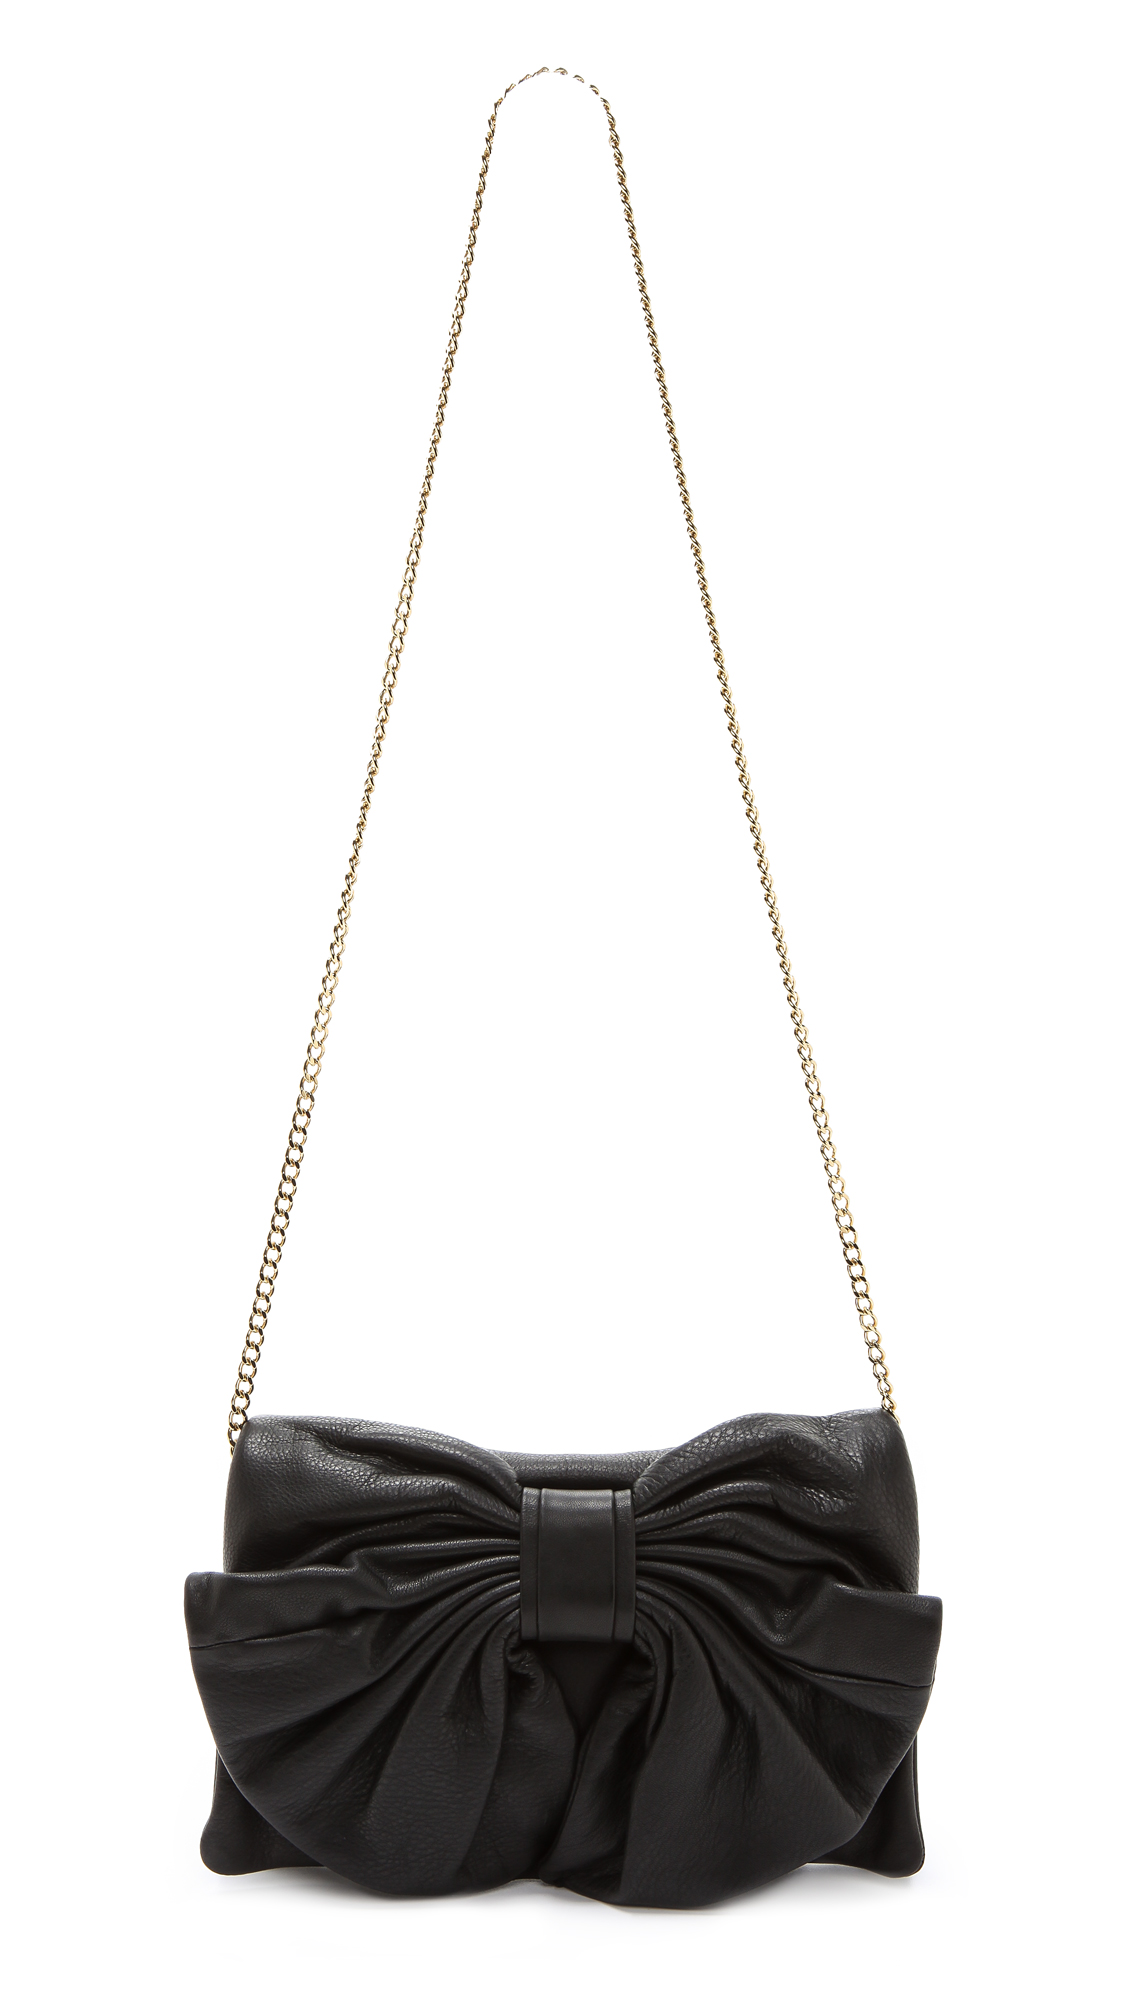 RED Valentino Bow Clutch in Black - Lyst